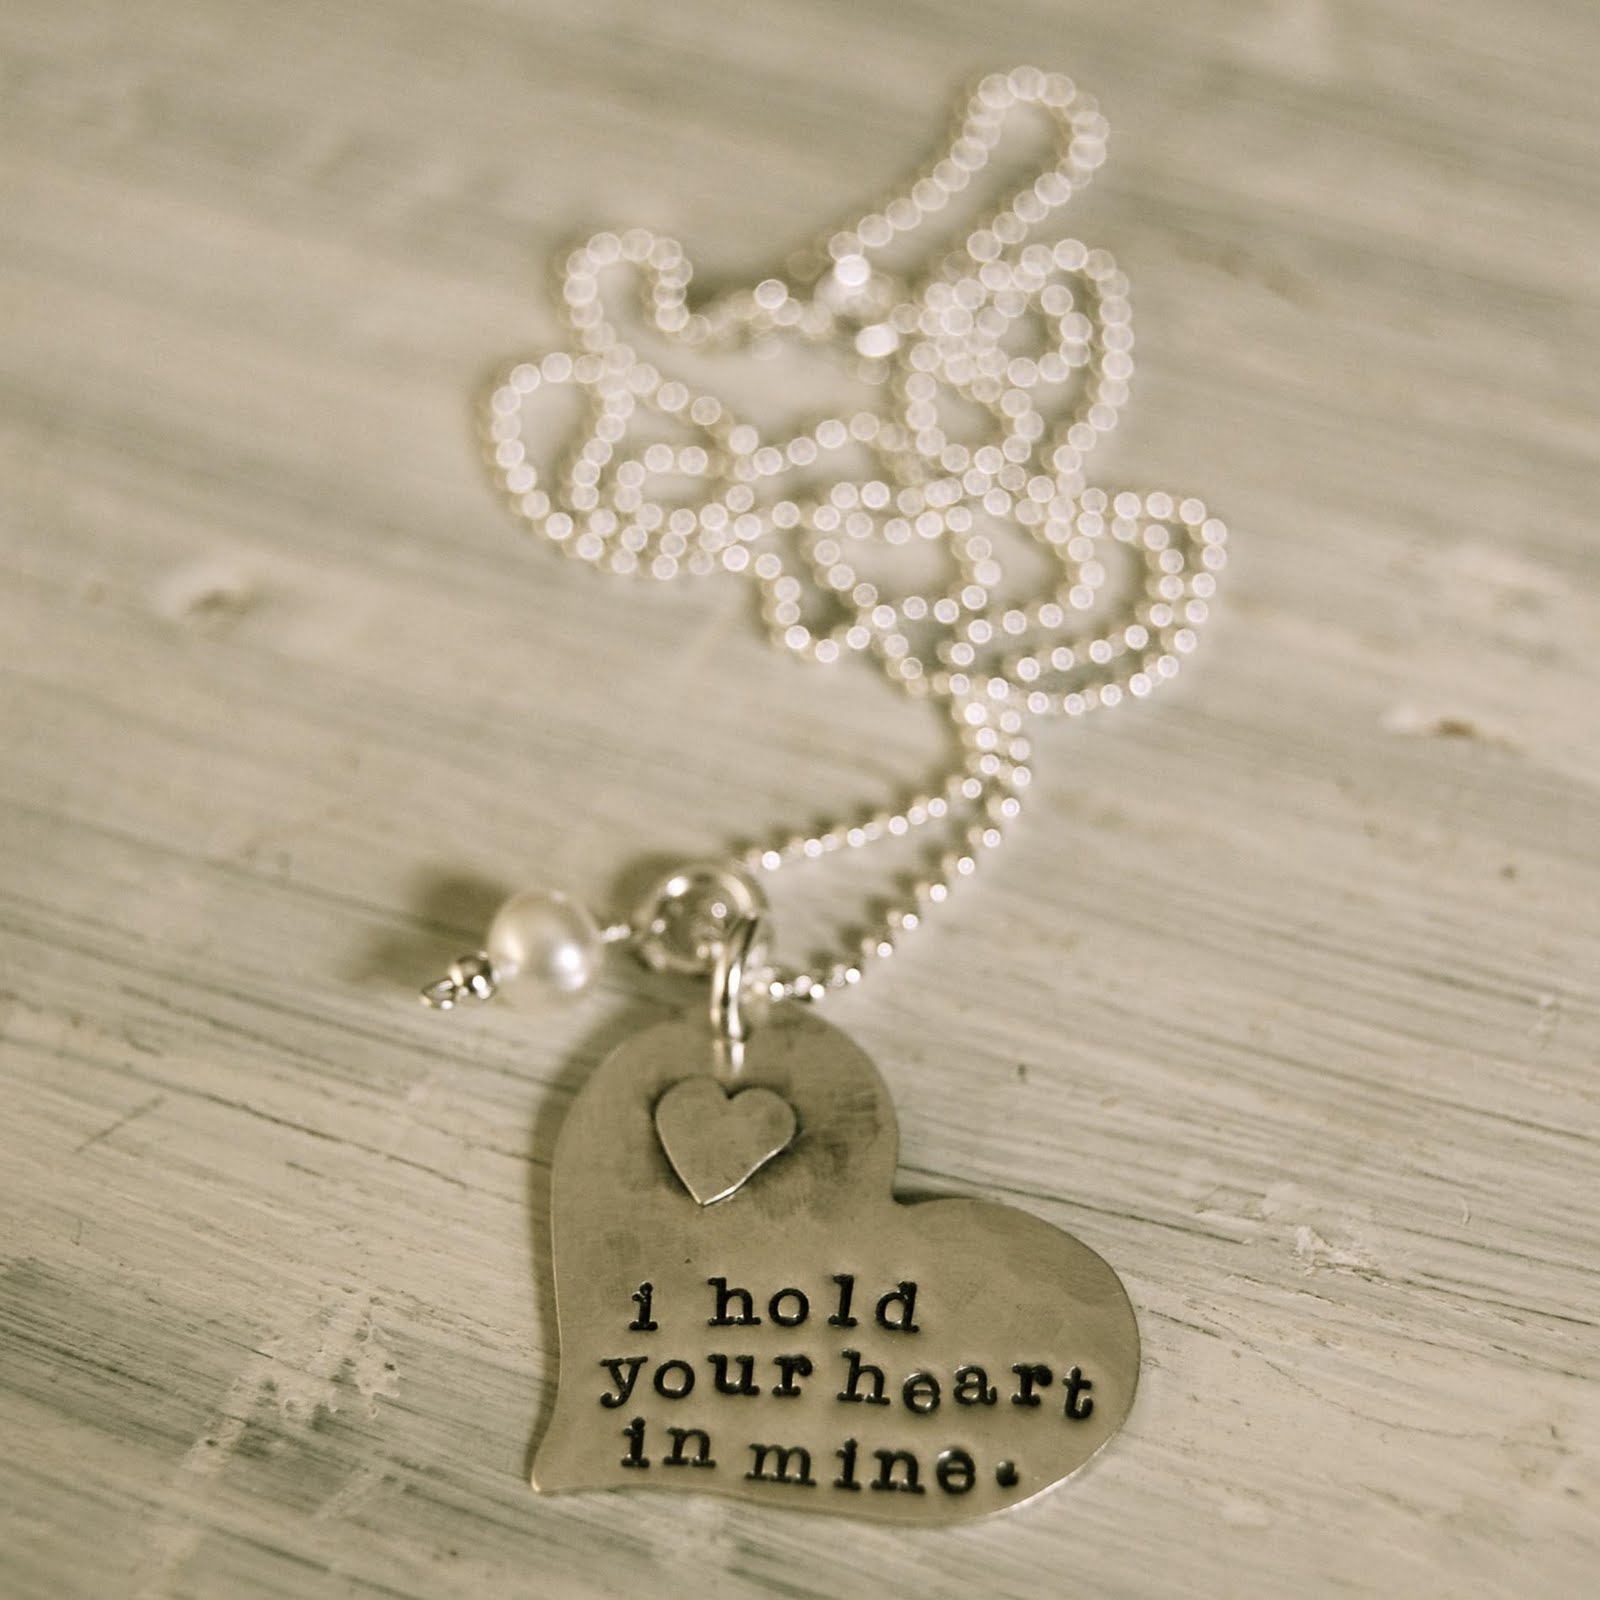 I carry your Heart with me браслет. Heart Necklace. Hold your Heart. Your Hearts are mine душа моя. Best of your heart